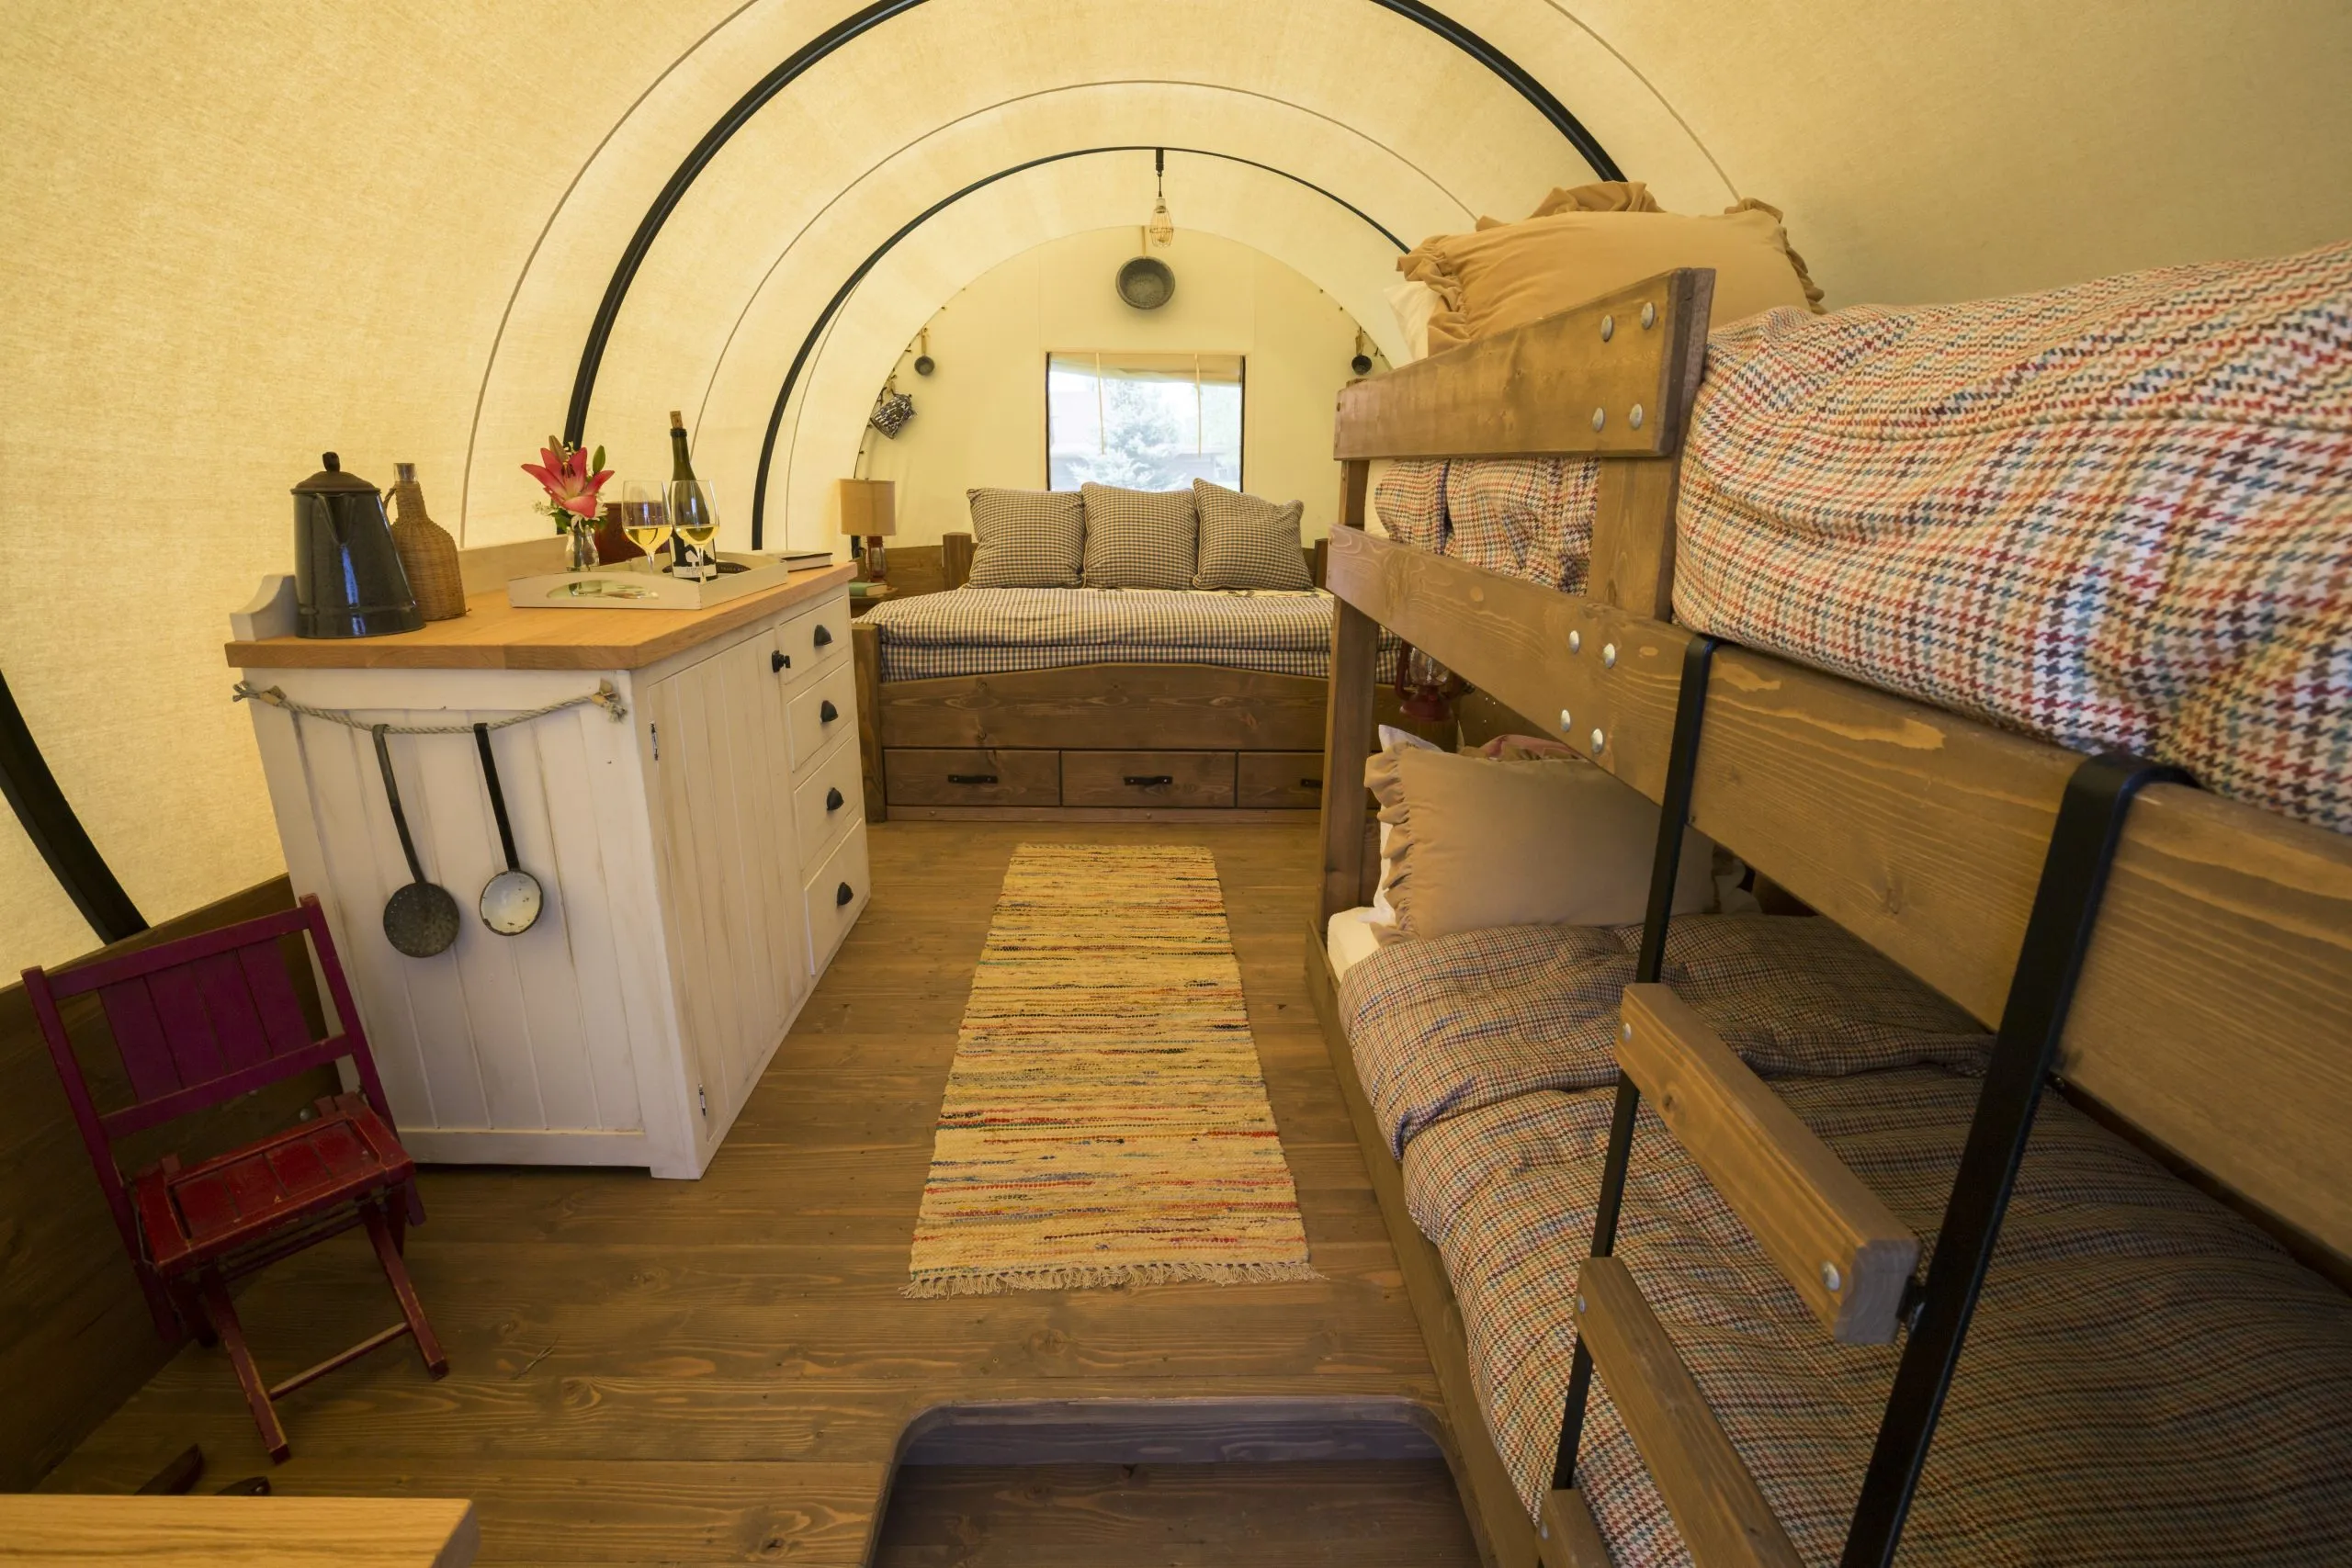 Interior of a covered wagon with bunk beds and a large bed at the end